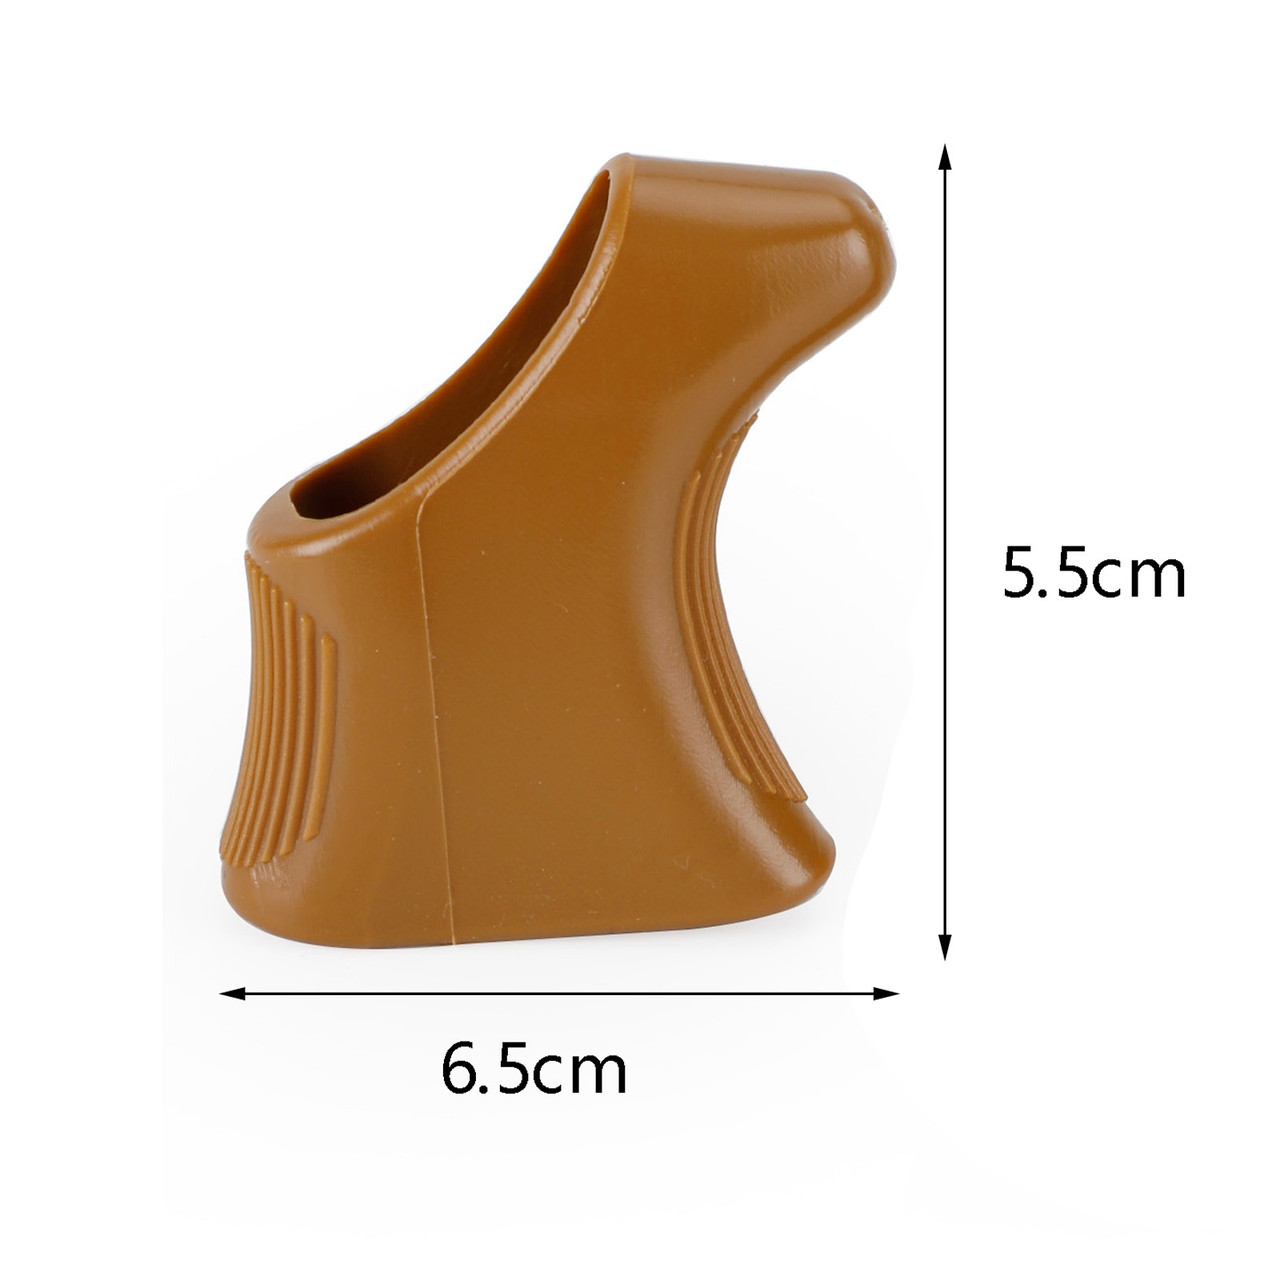 One Pair of Shield Brake Lever Hoods For Super record Brown